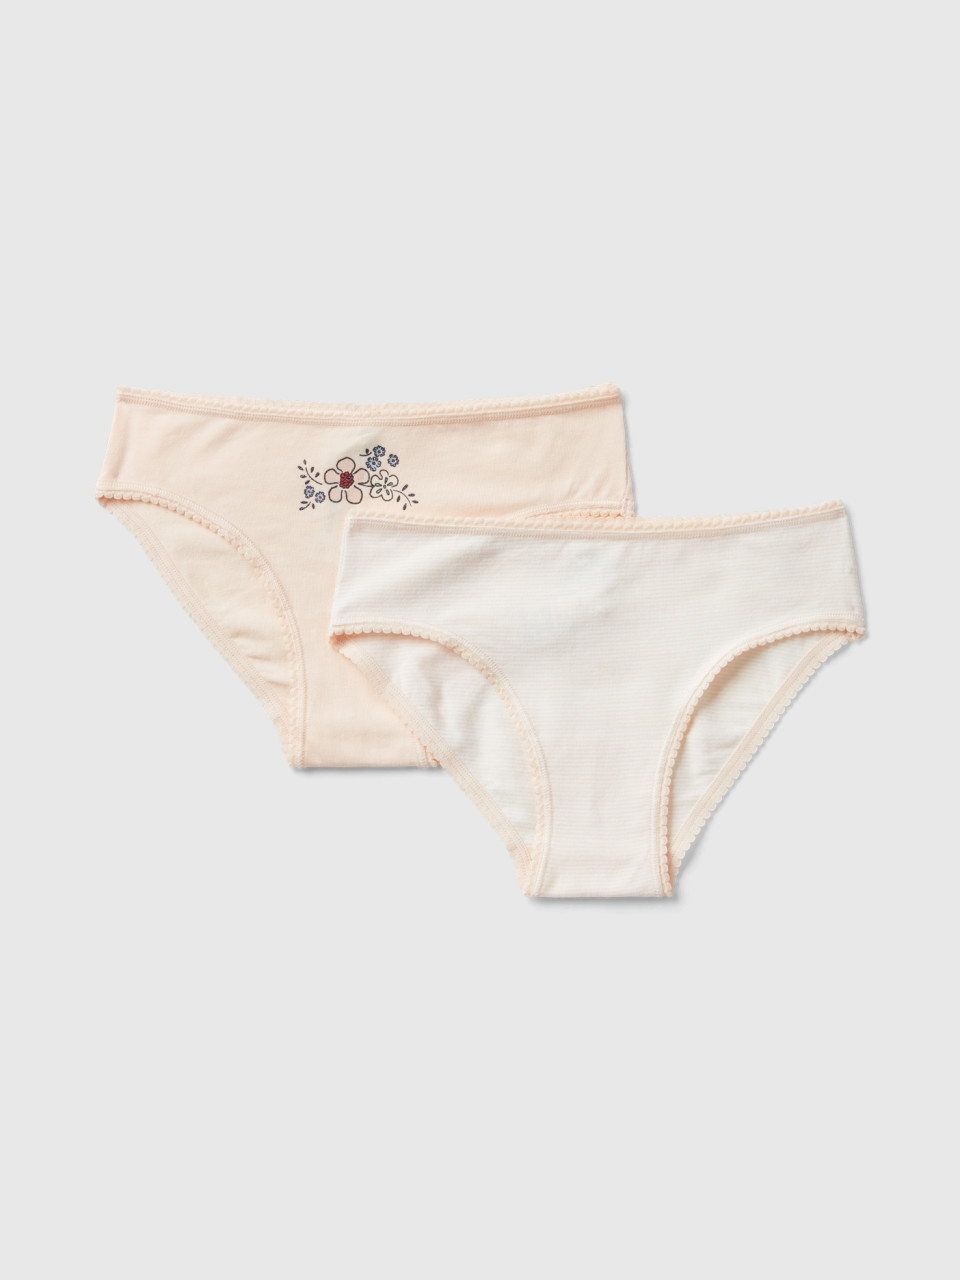 Benetton, Two Pairs Of Patterned Underwear In Stretch Cotton, Peach, Kids